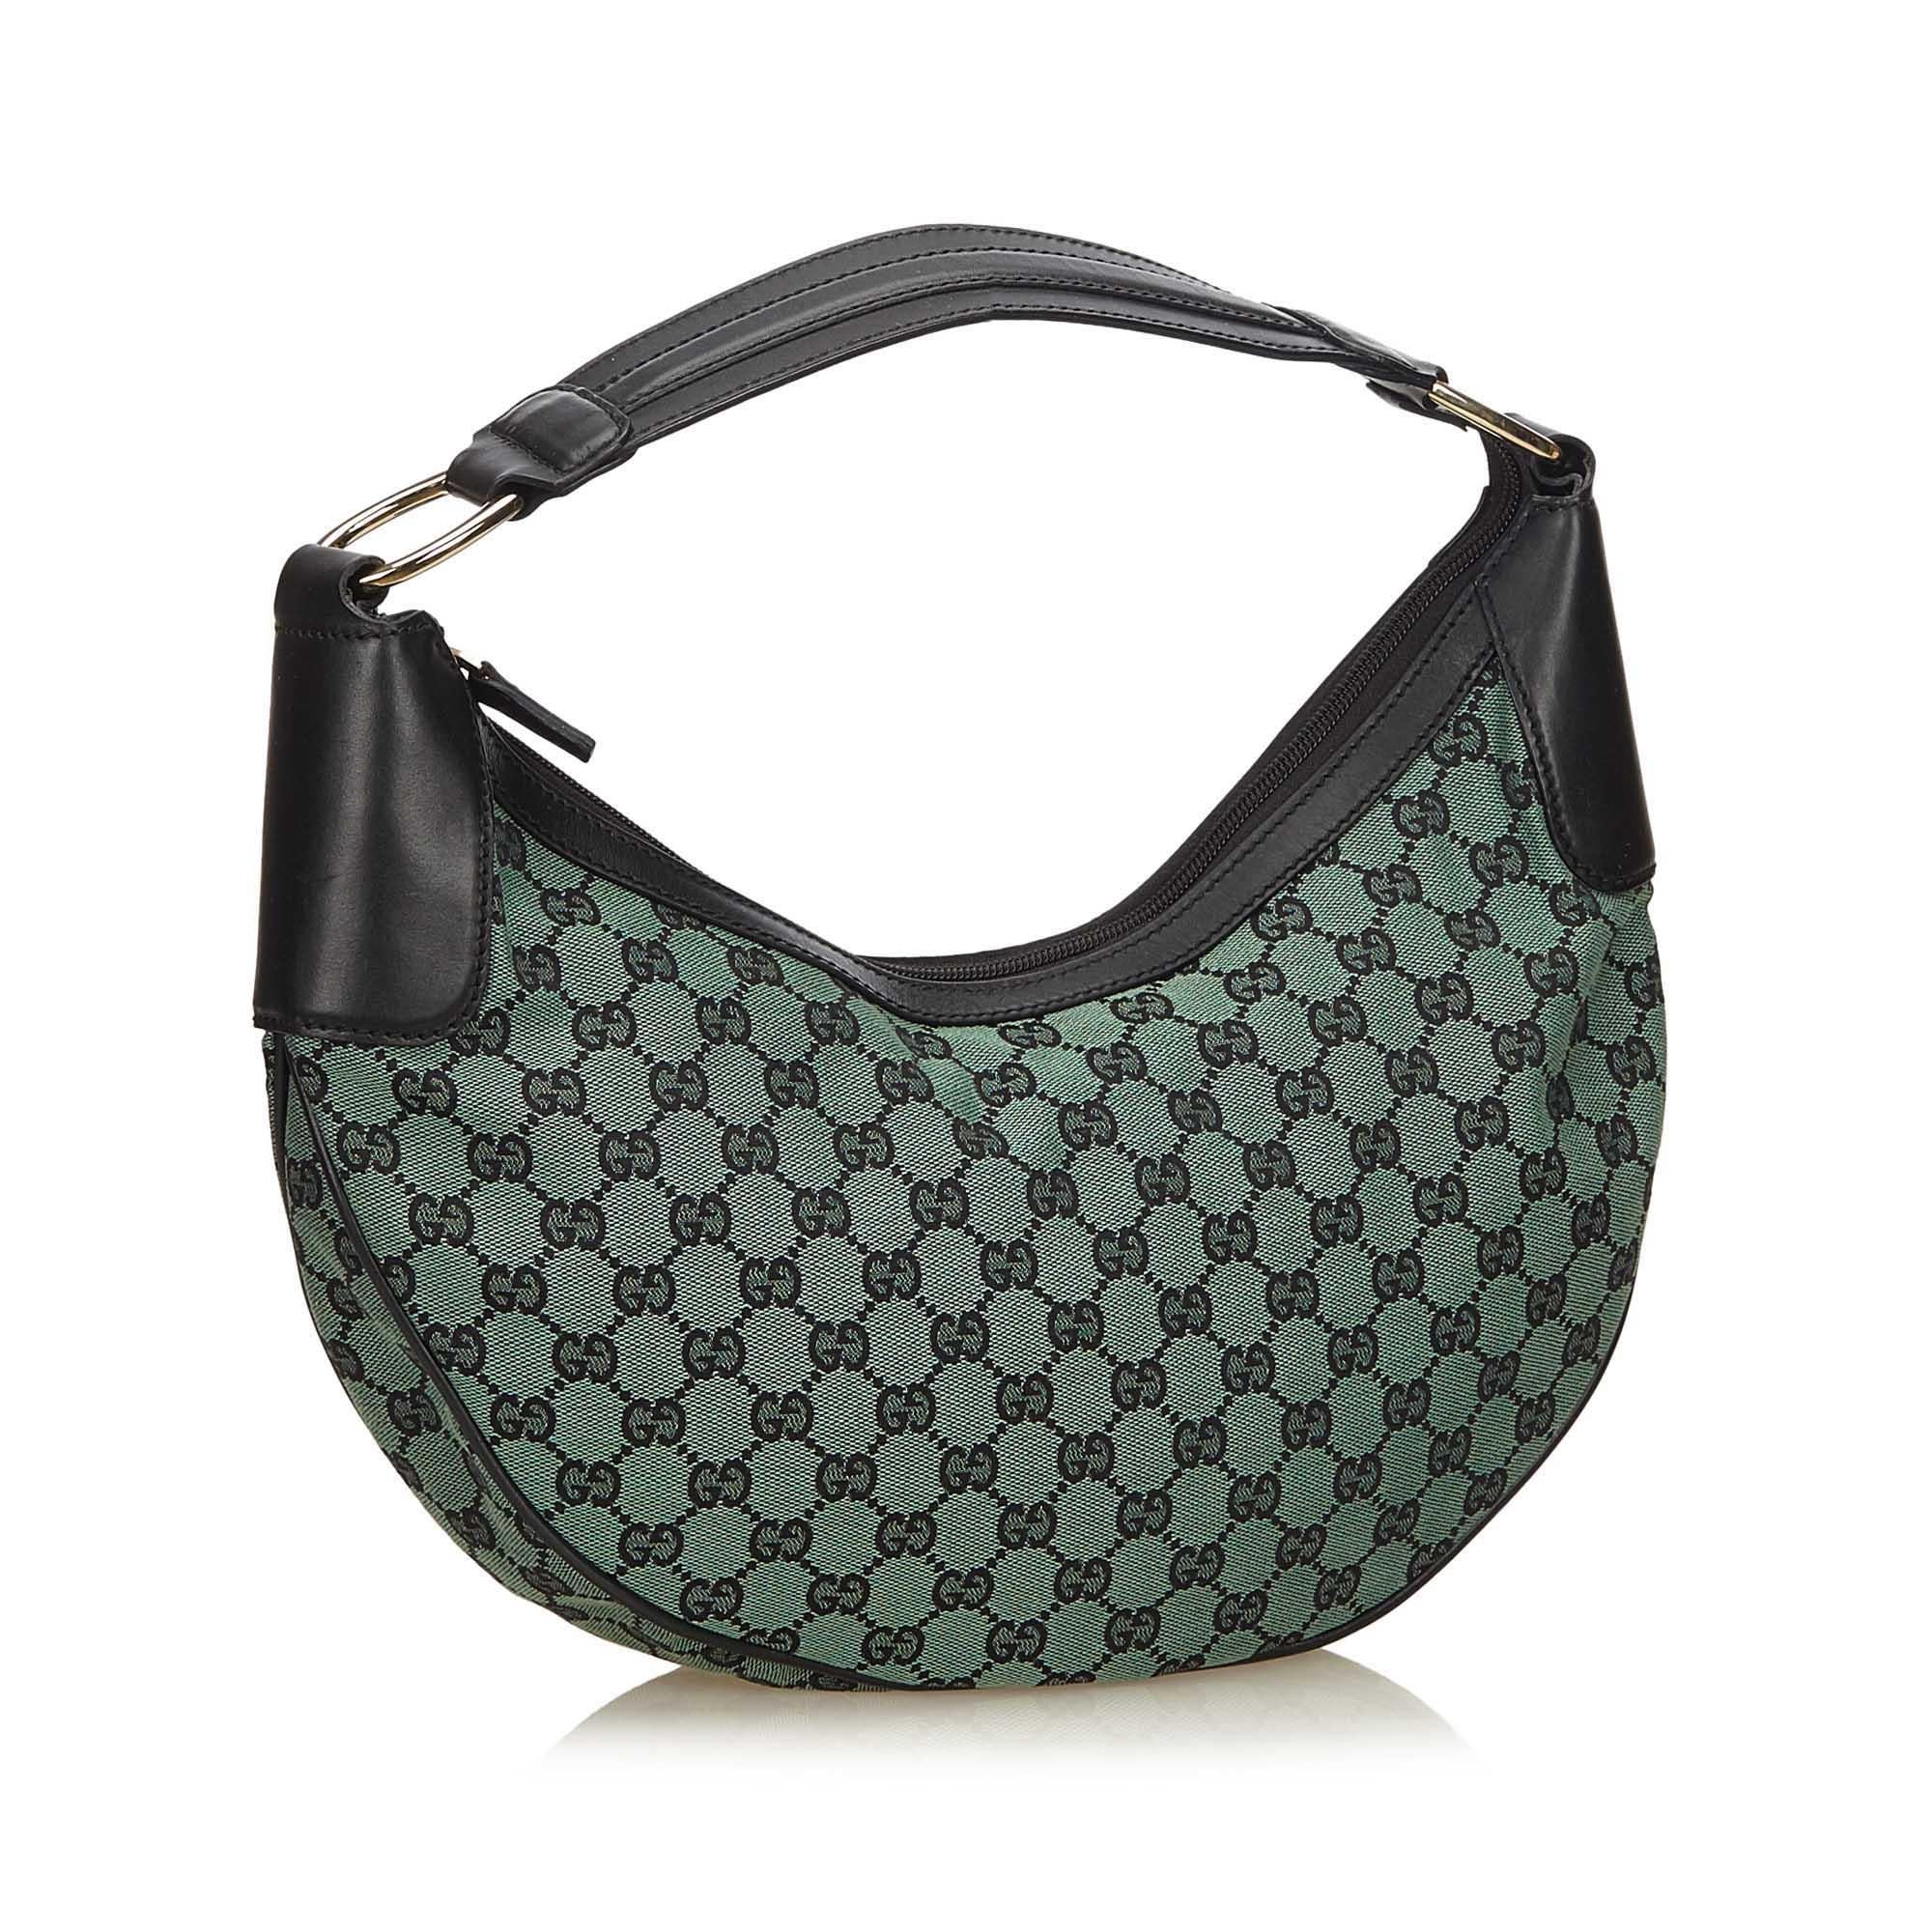 This hobo bag features a jacquard body, a flat leather shoulder strap, a top zip closure, and an interior zip pocket. It carries as AB condition rating.

Inclusions: 
This item does not come with inclusions.

Dimensions:
Length: 20.00 cm
Width: